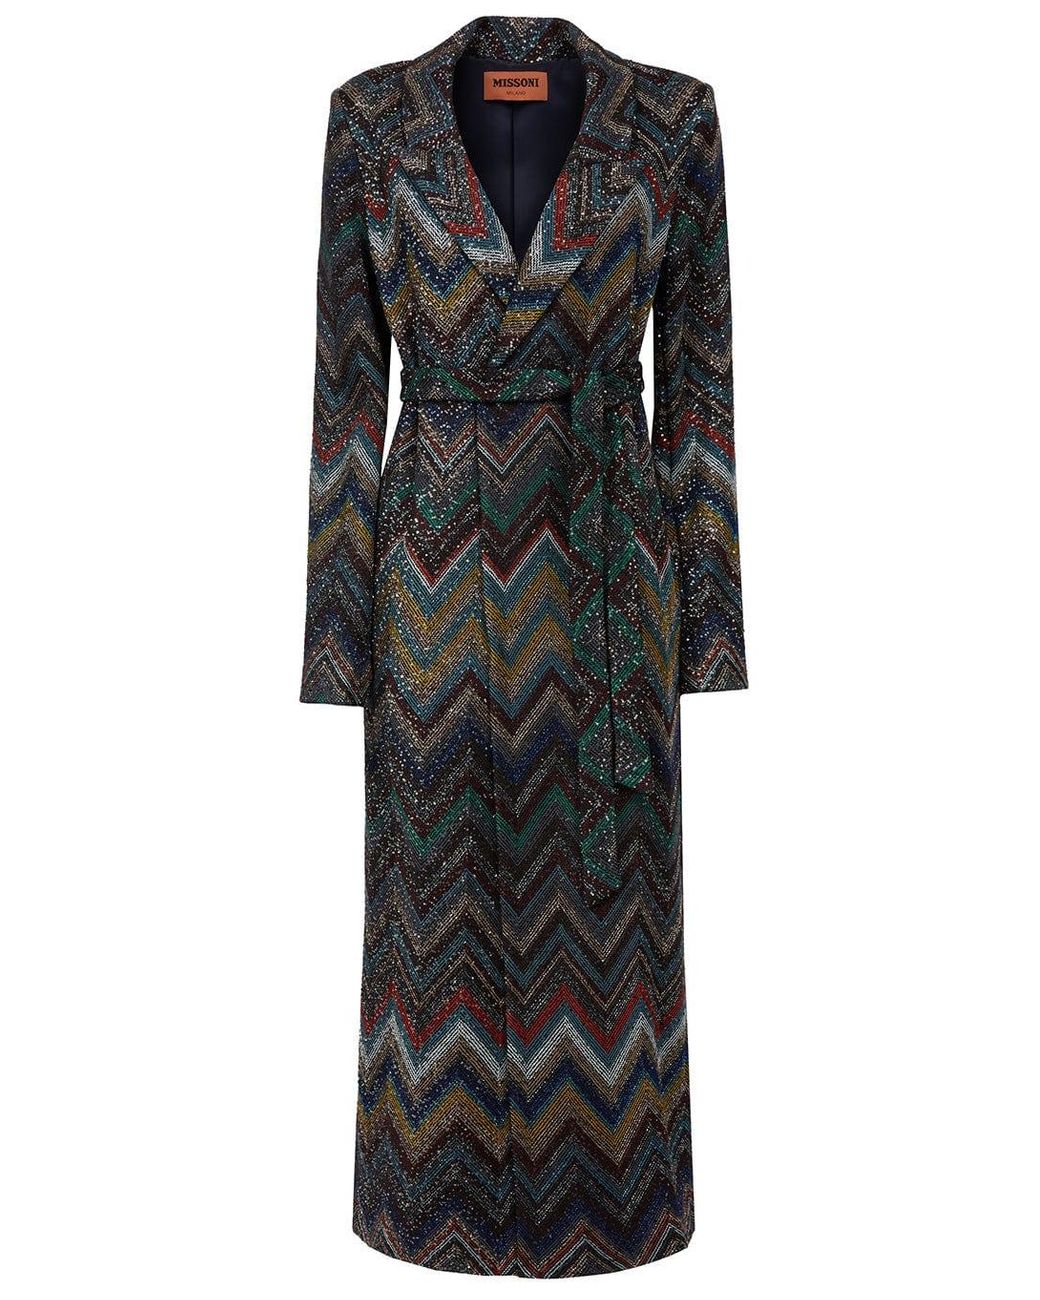 Missoni Synthetic Light Weight Caperdoni Coat in Black | Lyst